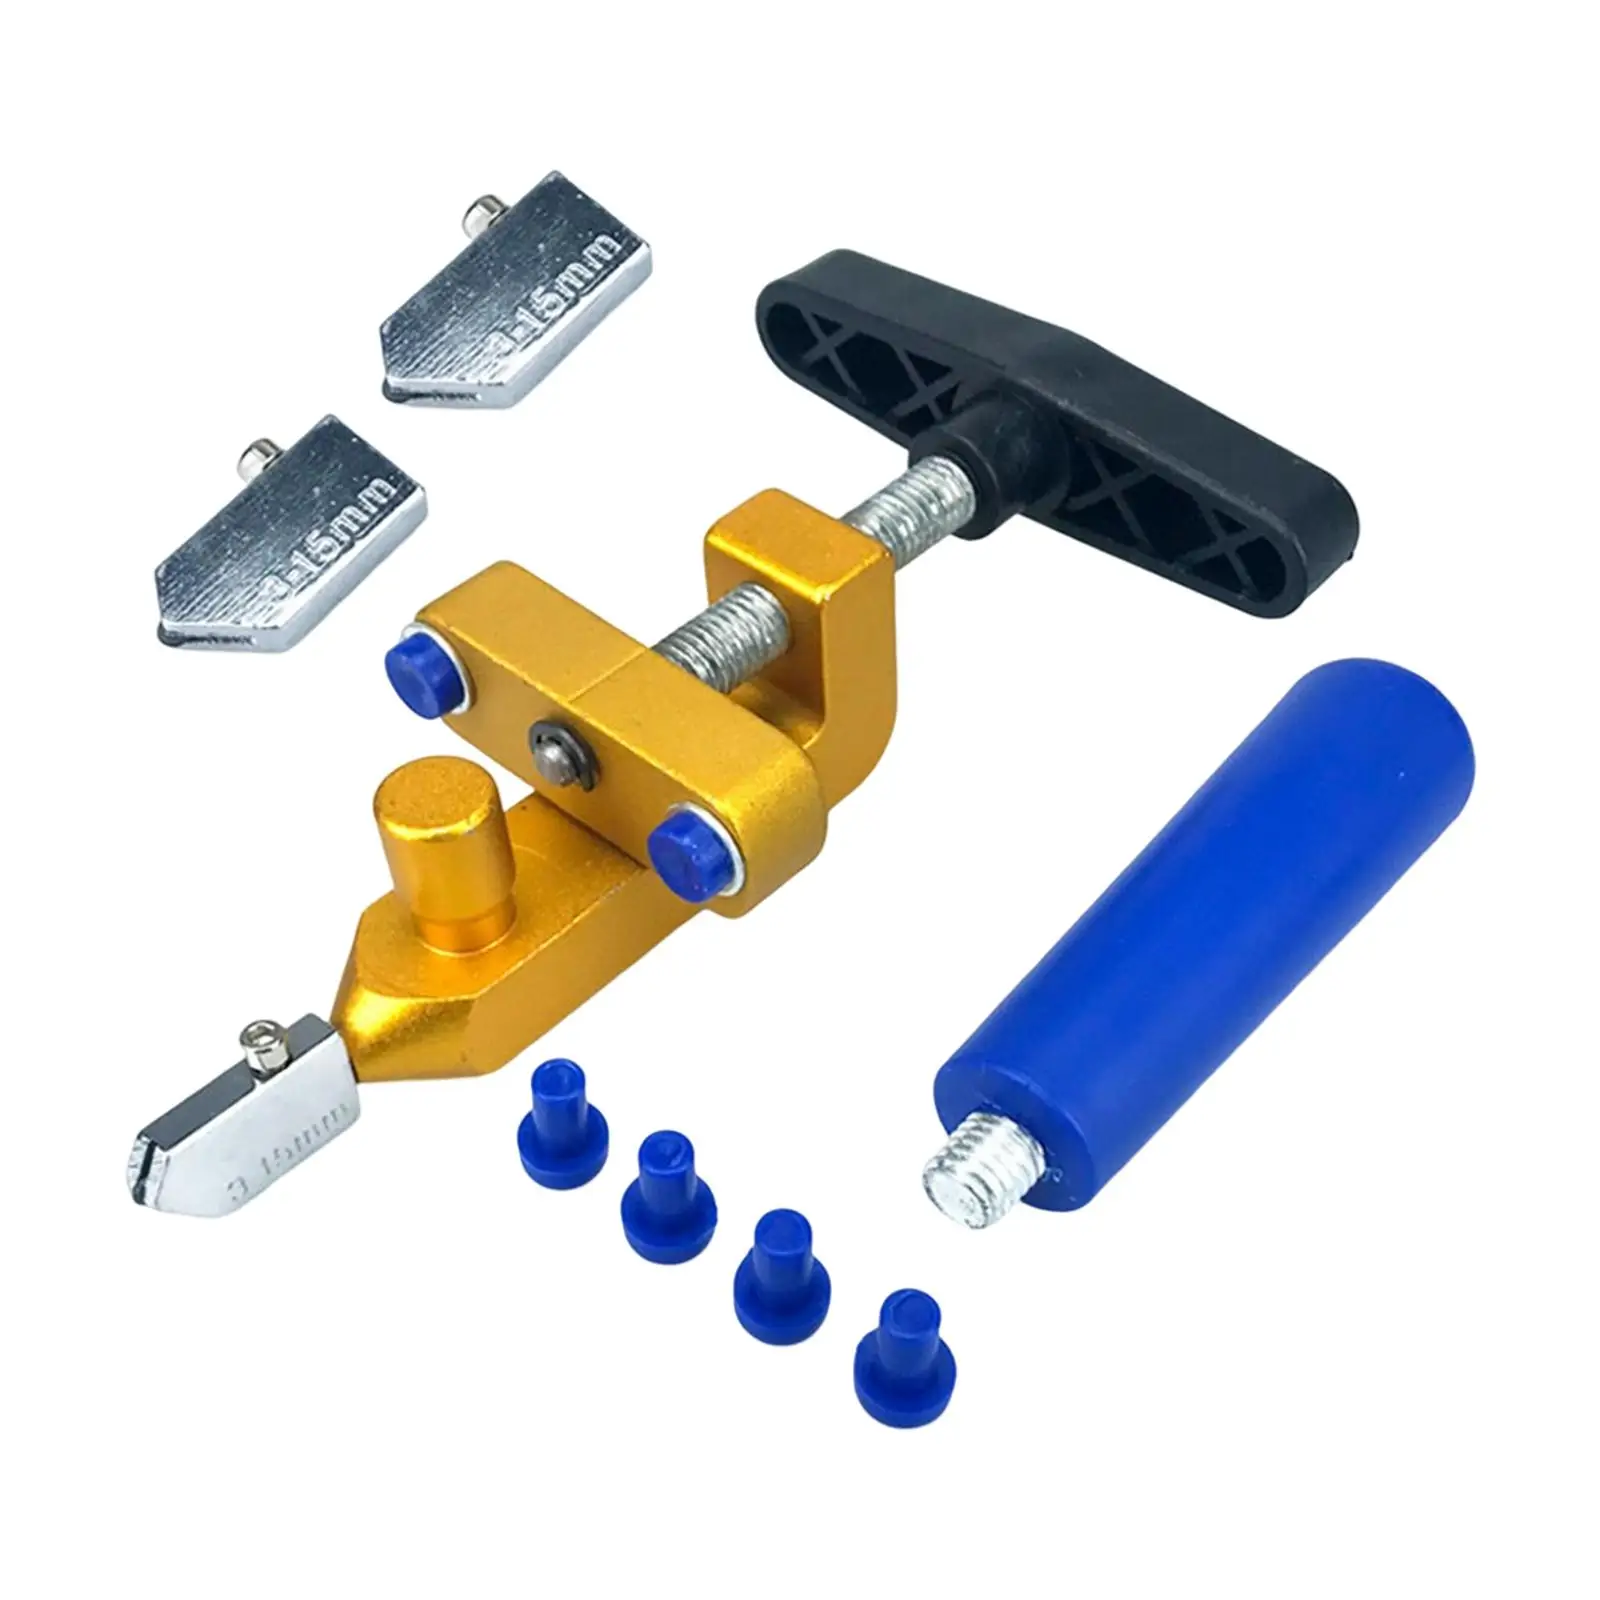 Multifunctional Tile Cutter Hand Tools Construction Tool Mirror Cutting Kit for Home DIY Ceramic Thick Glass Glazed Tiles Tiles